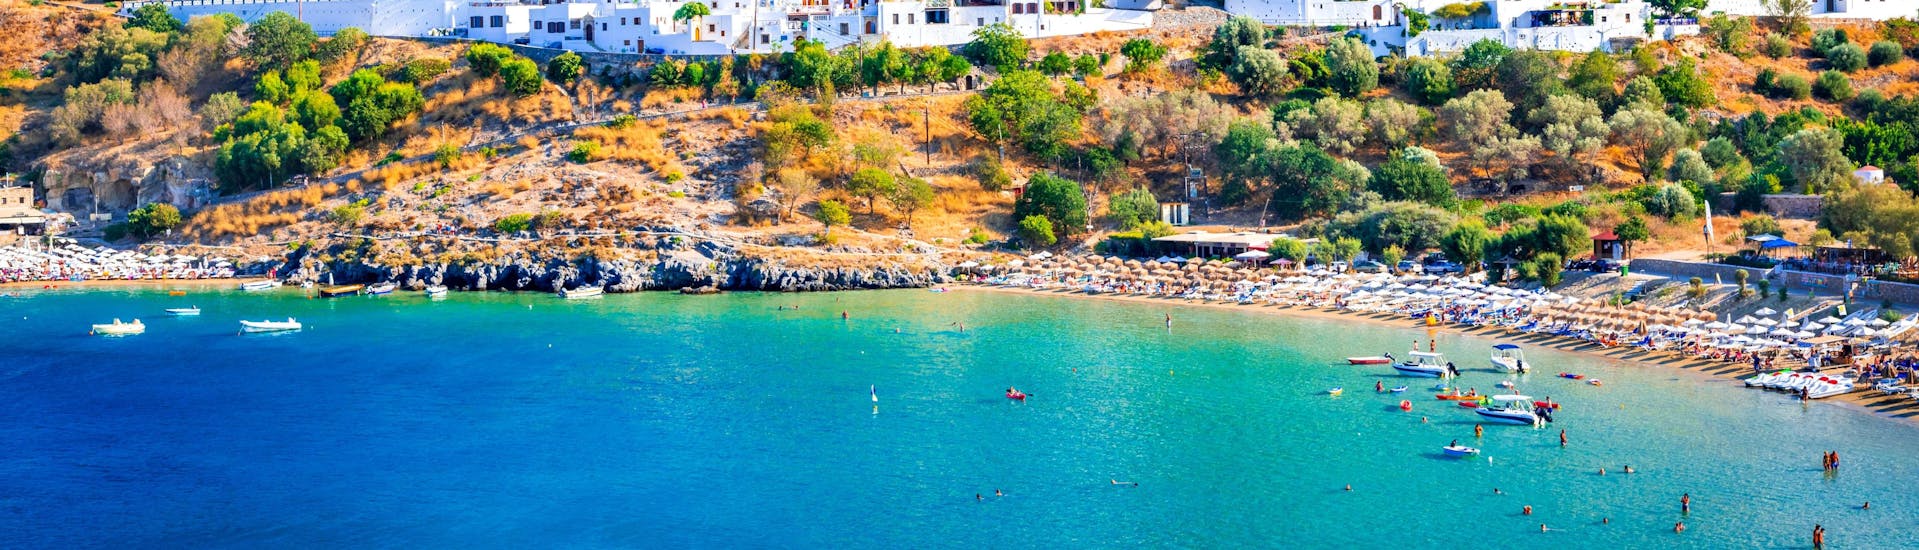 An image of one of the beautiful beaches where you can try jet ski or other water sports in Faliraki, Rhodes.